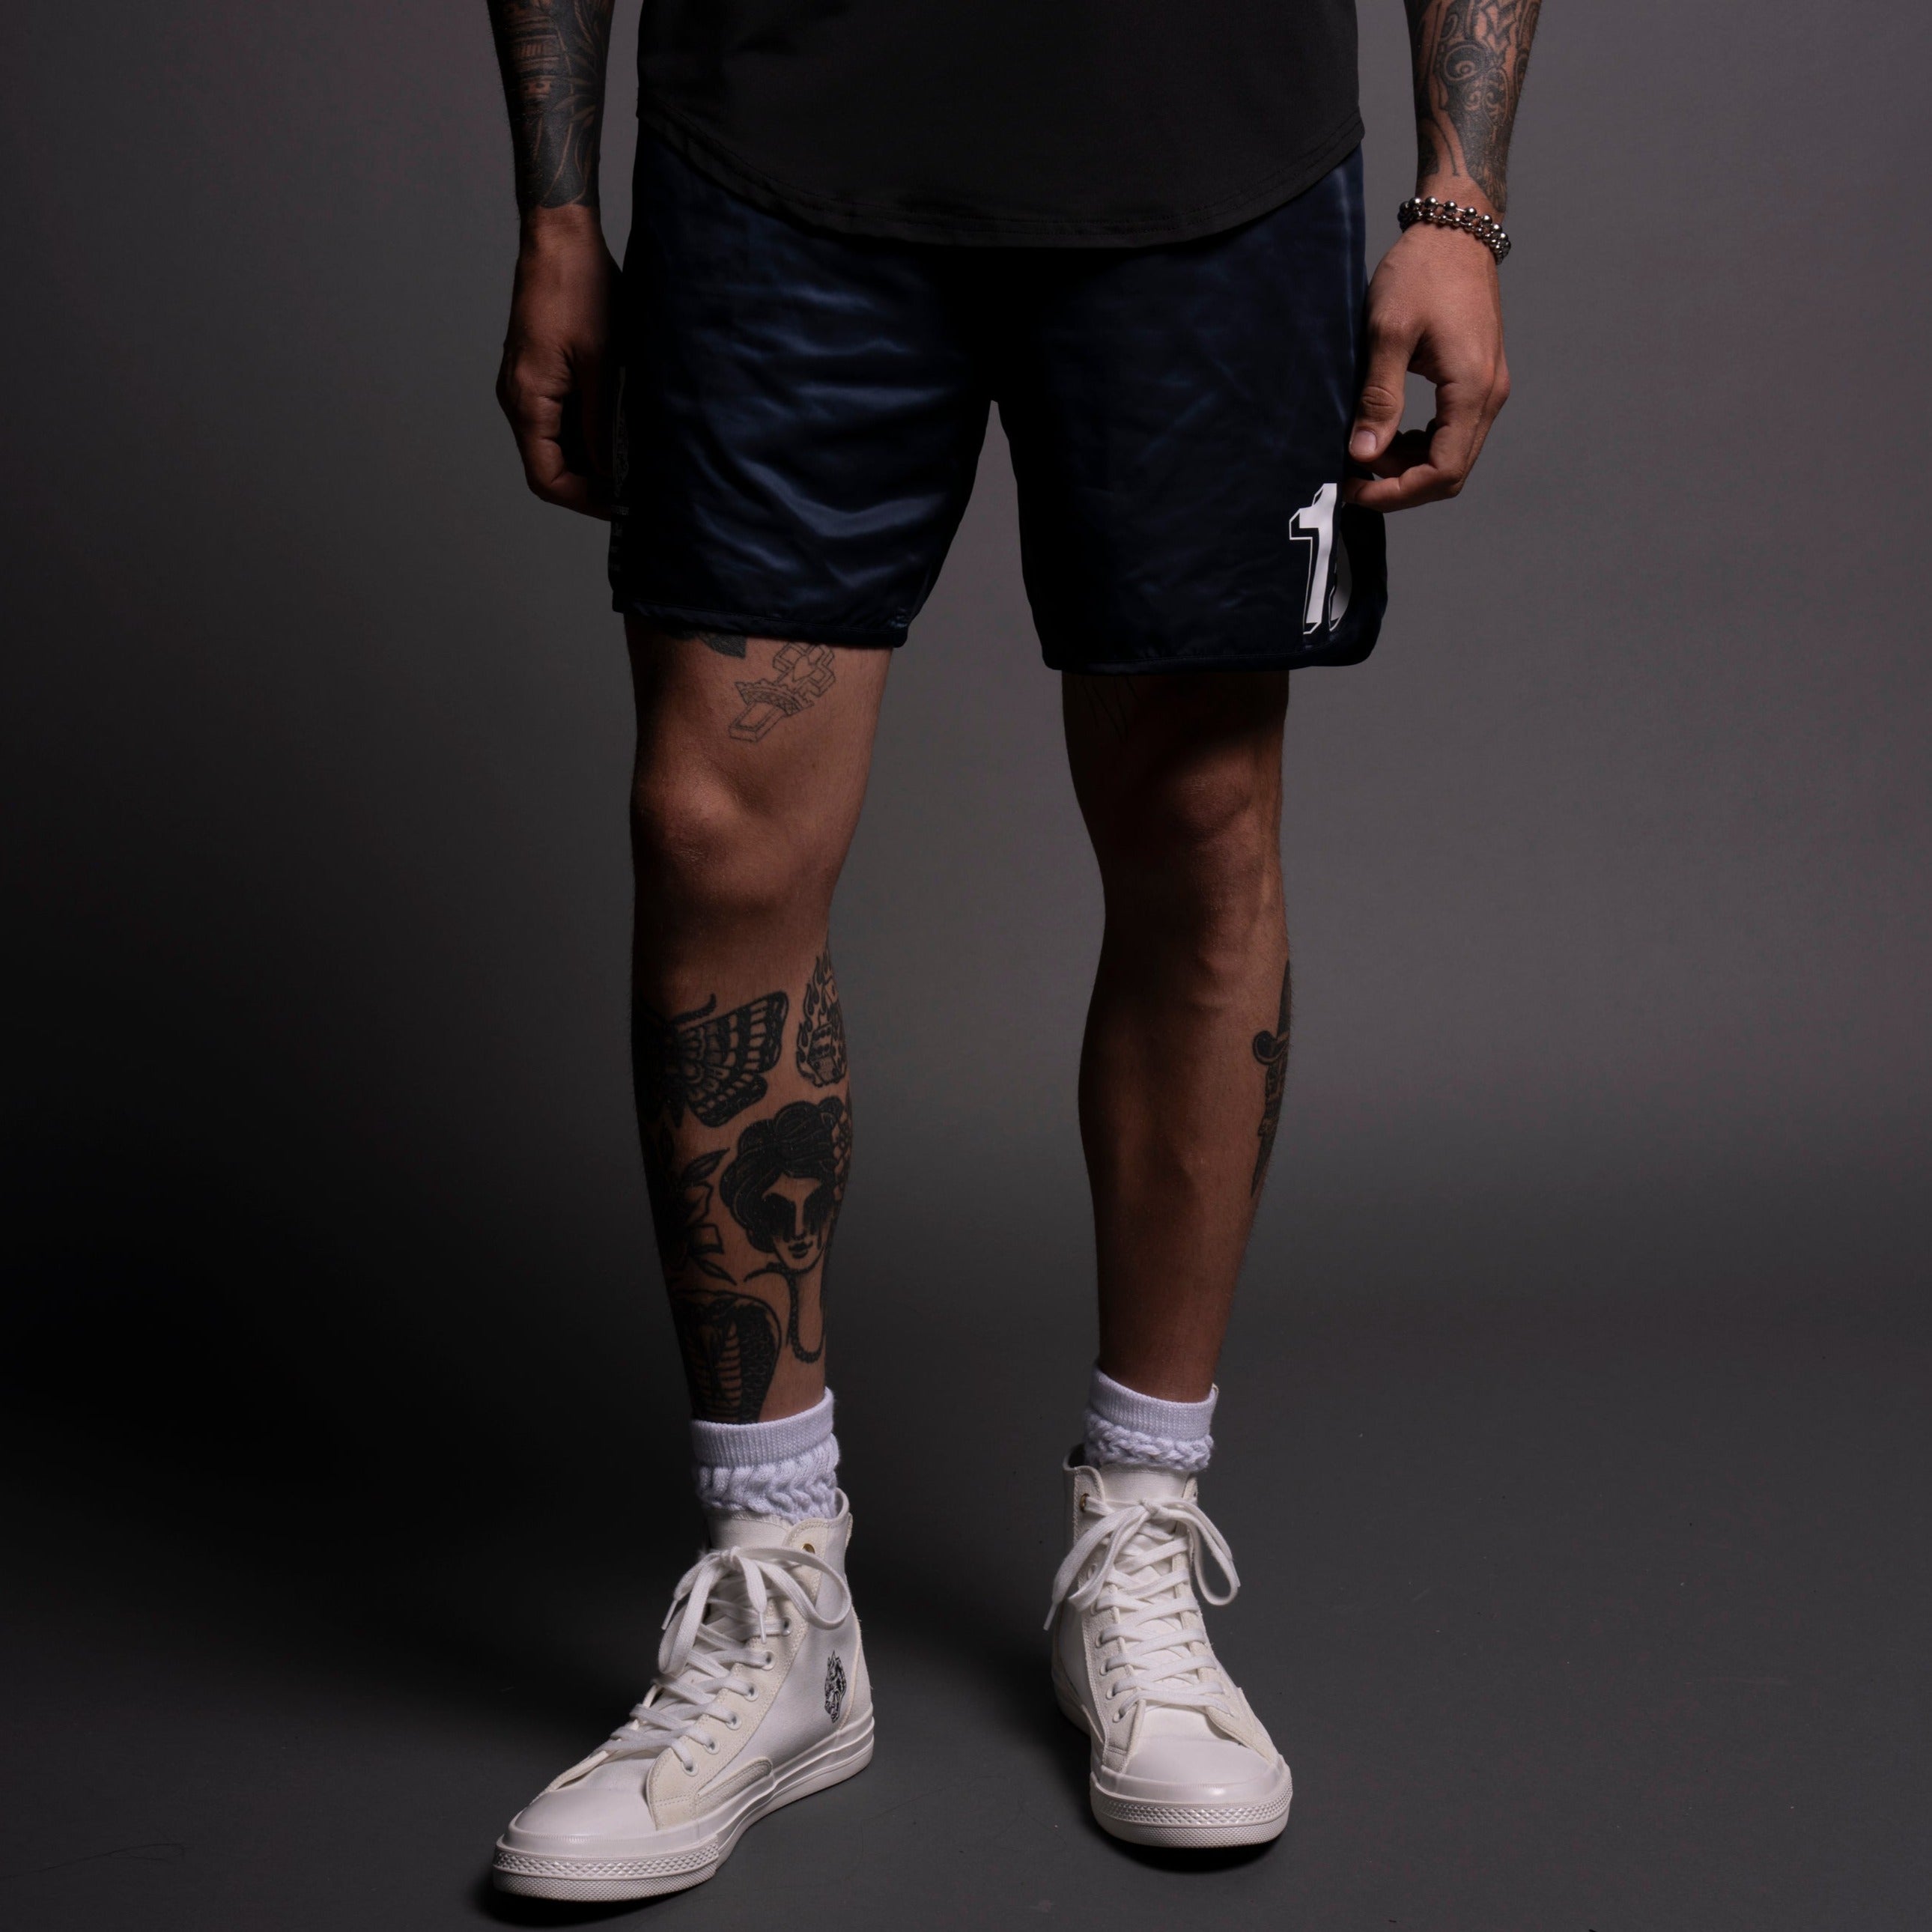 Our Stamp Gerard Shorts in Navy